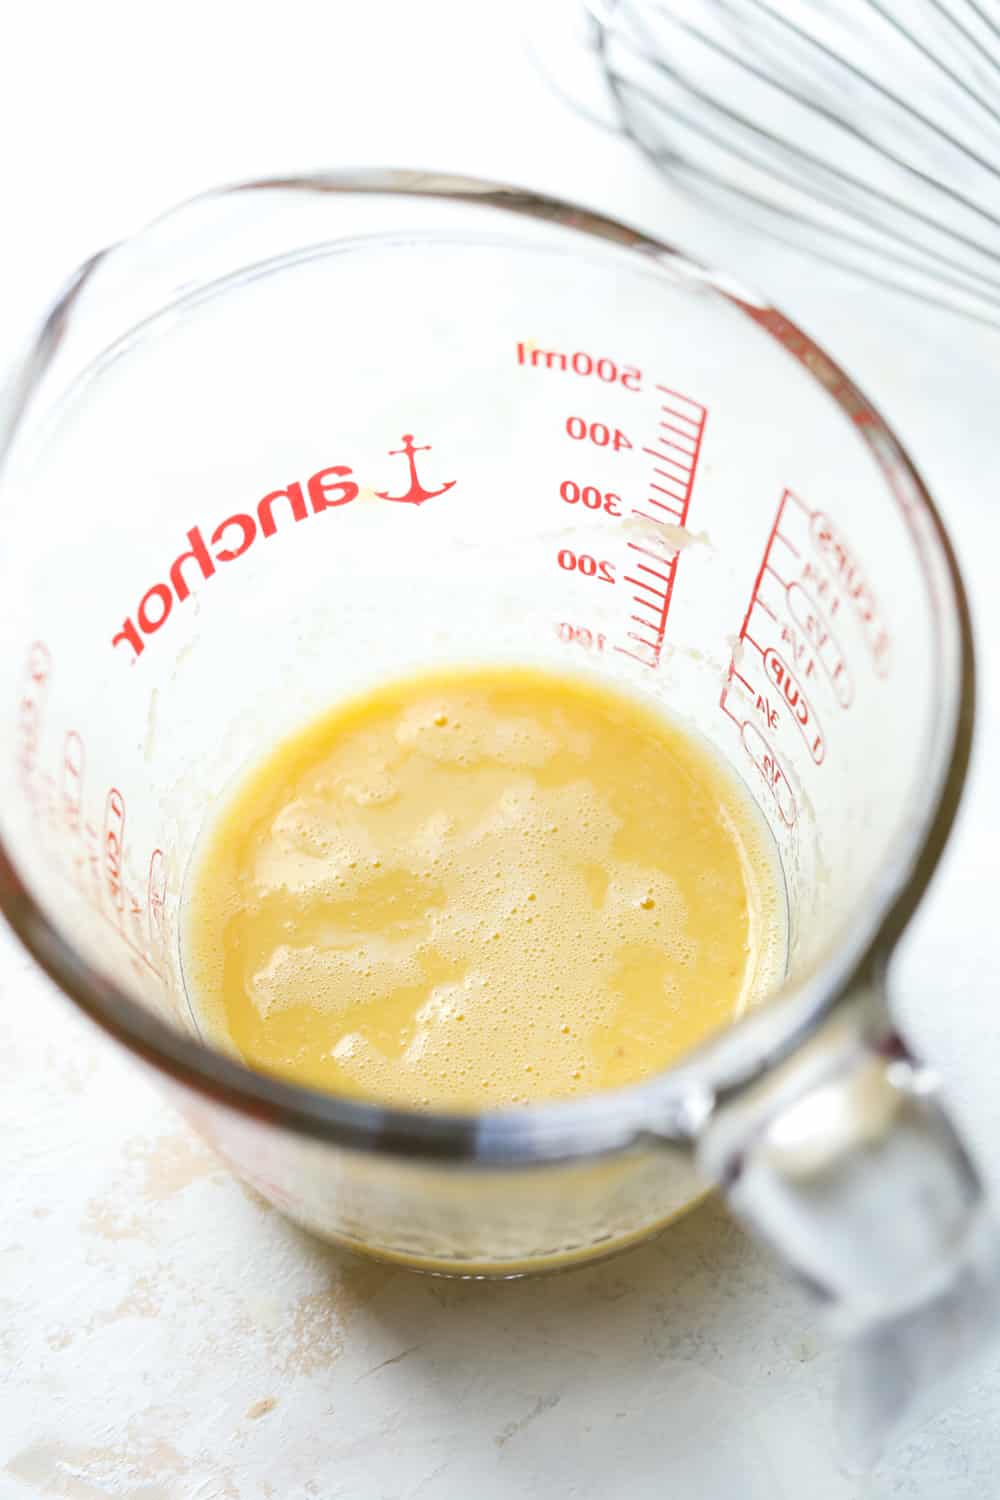 An egg and applesauce whisked together in a small measuring cup.